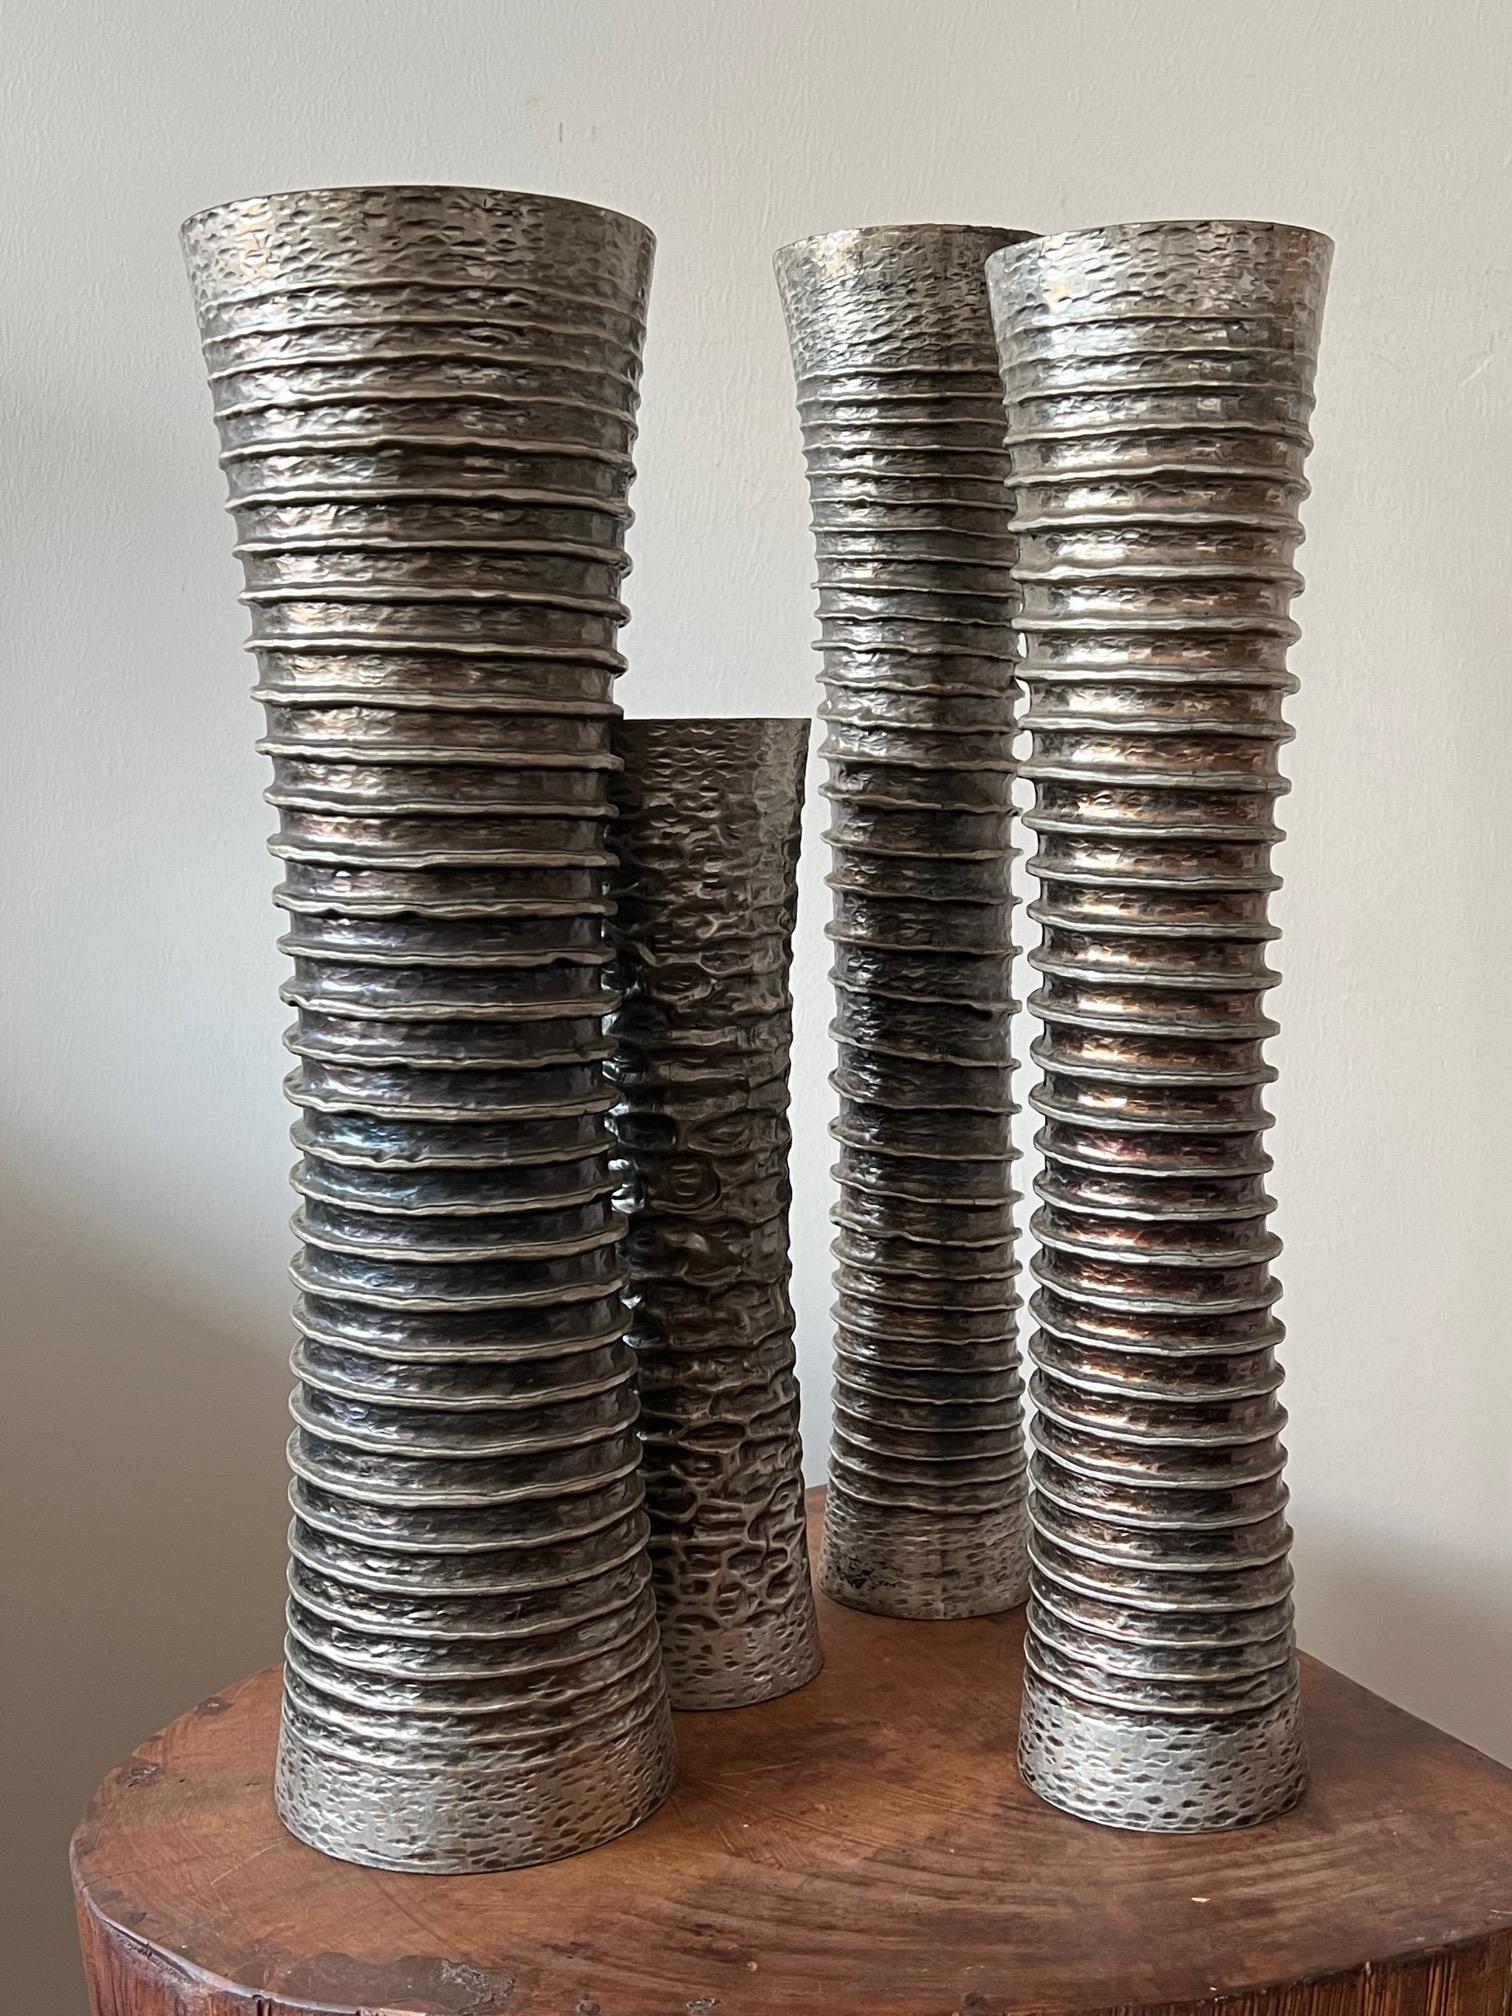 Silvered Group of Vases by Atelier des Orfevres 1970's For Sale